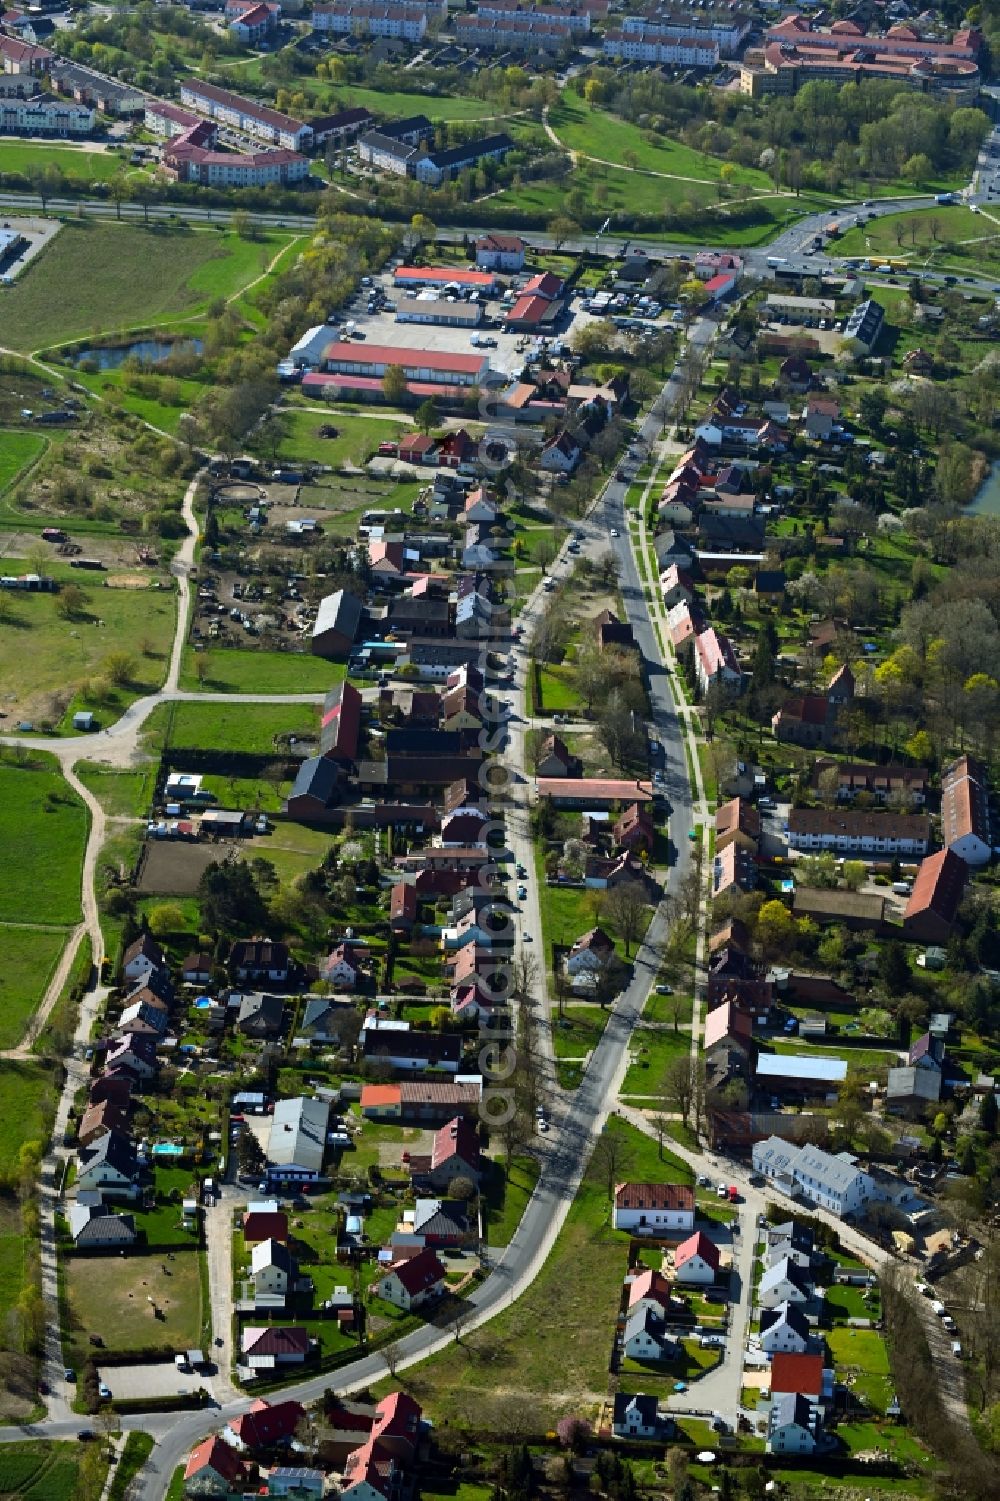 Hönow from the bird's eye view: Town View of the streets and houses of the residential areas in Hoenow in the state Brandenburg, Germany